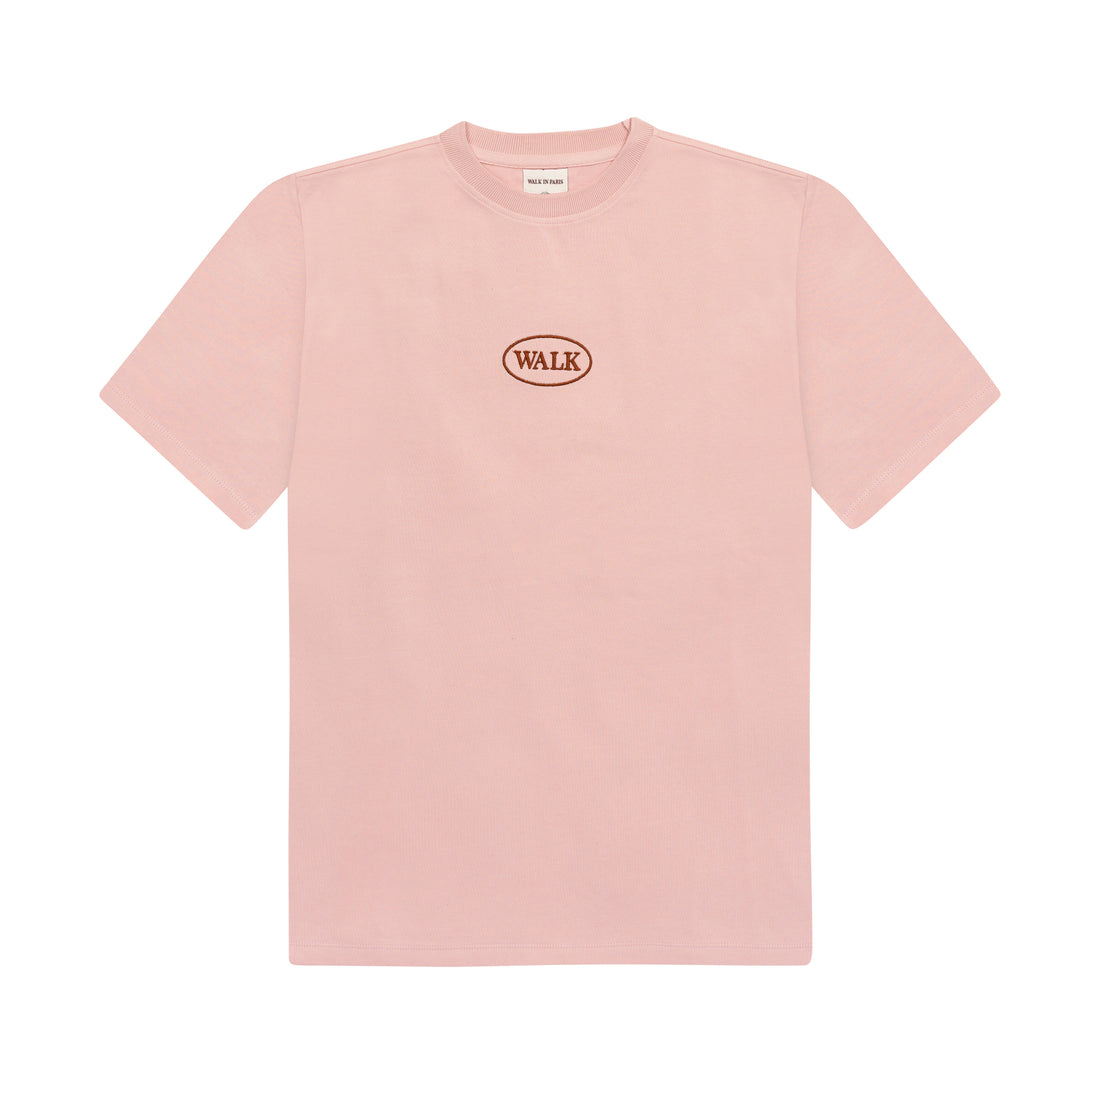 THE CLASSIC PINK T-SHIRT